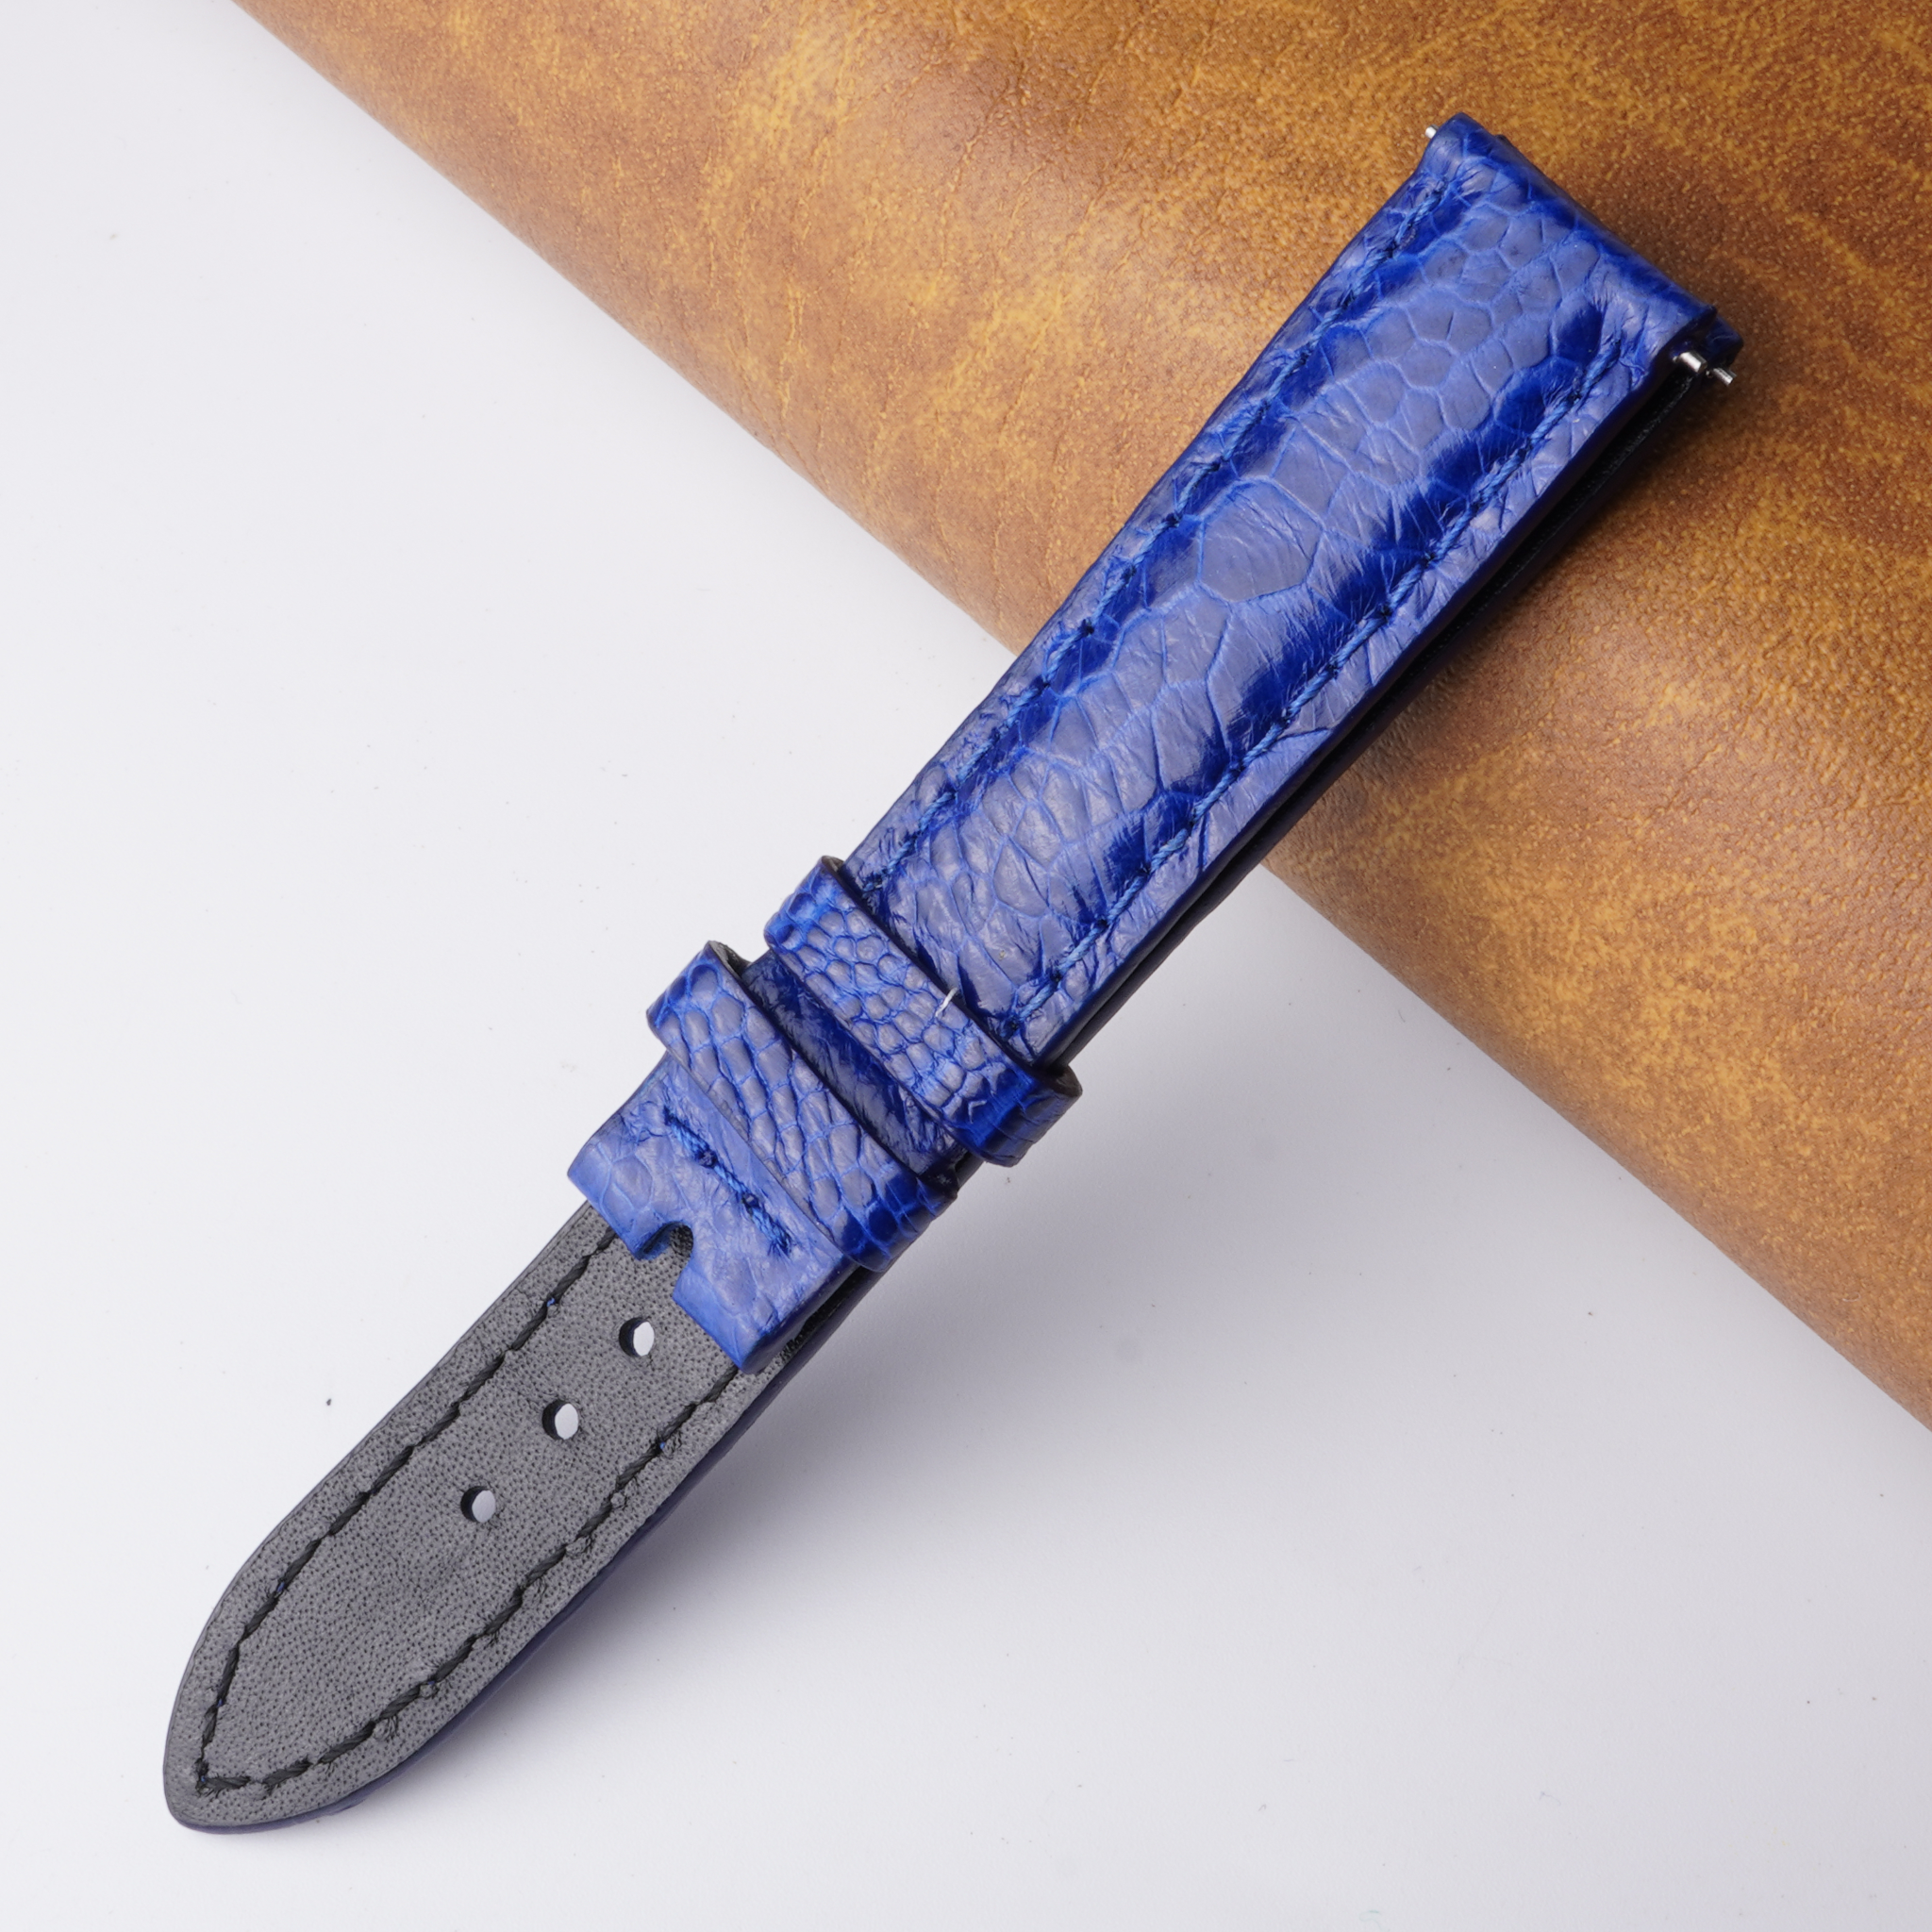 18mm Blue Unique Pattern Ostrich Leather Watch Band For Men DH-192A